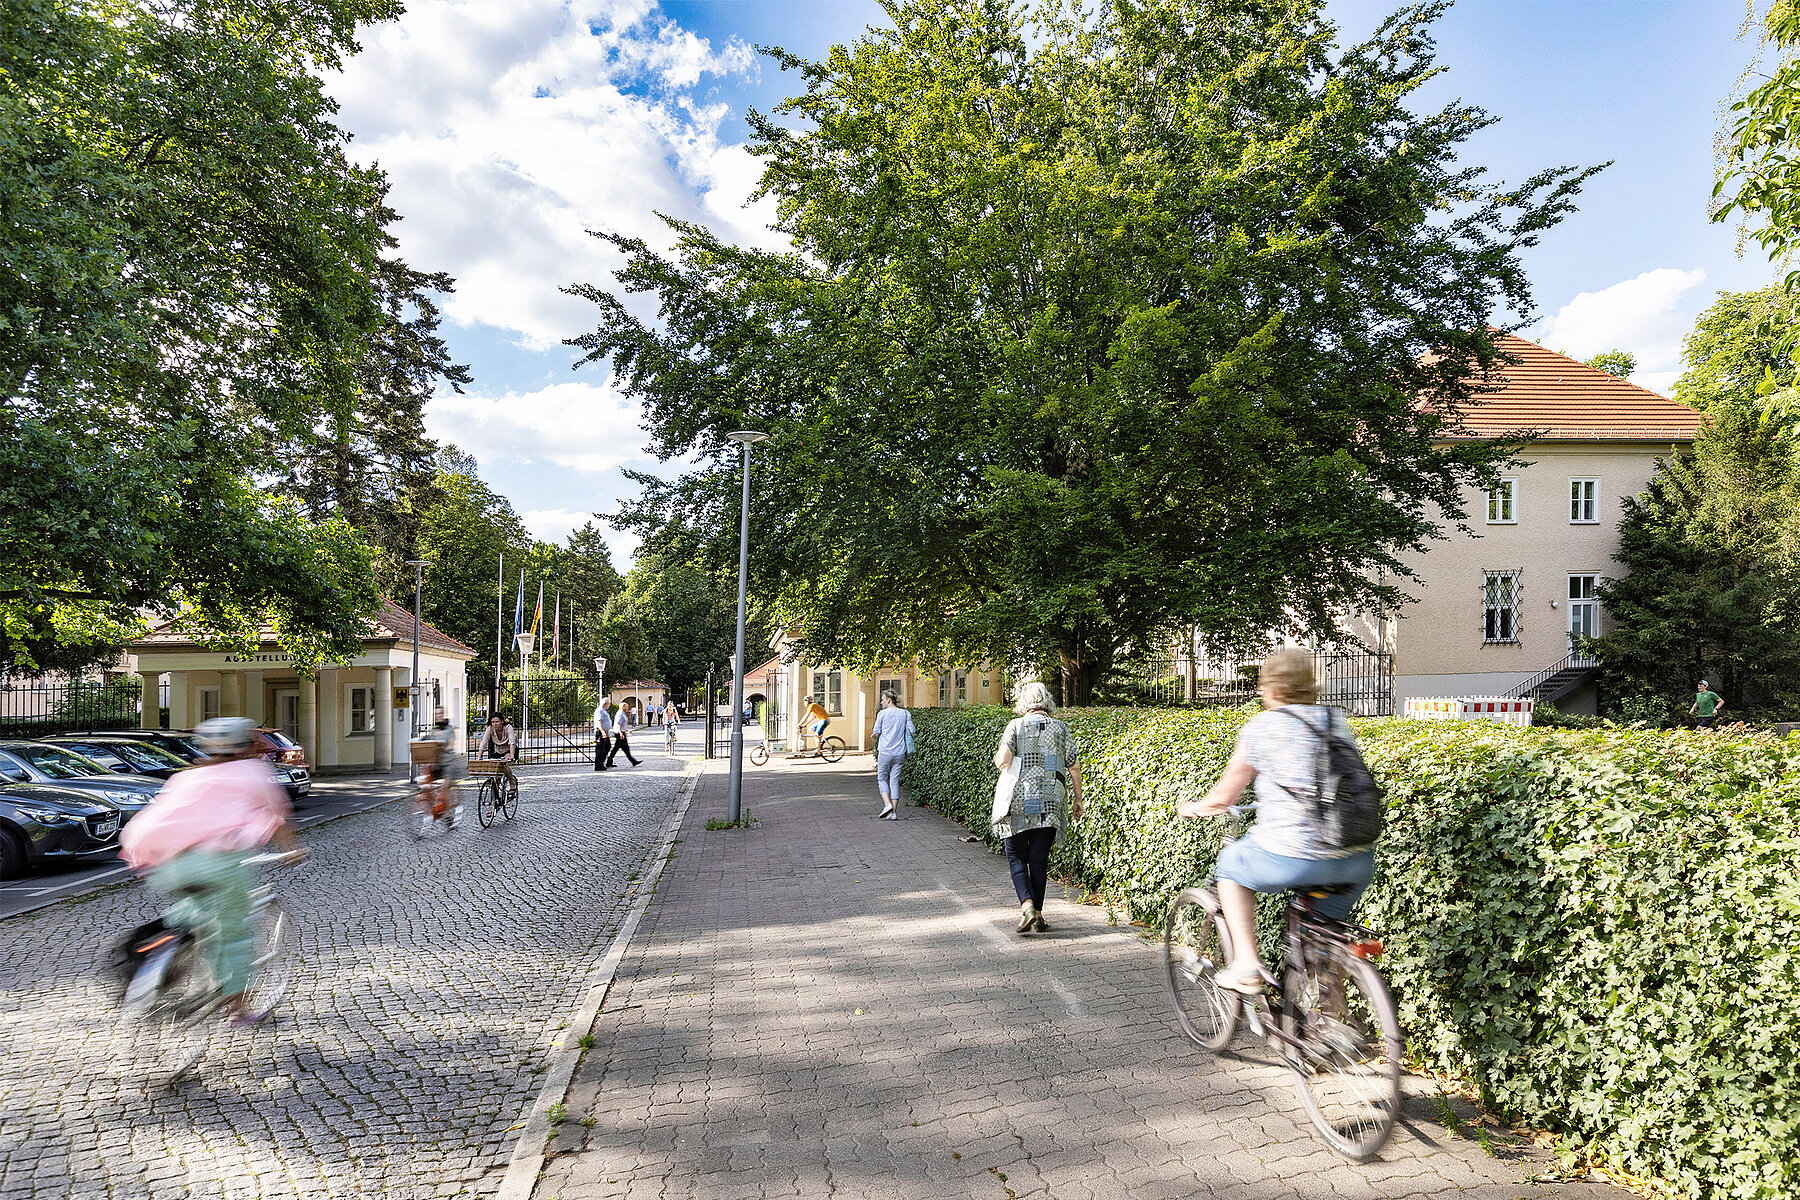 Street running towards the entrance to the castle park. Passers-by are on foot and on bicycles.